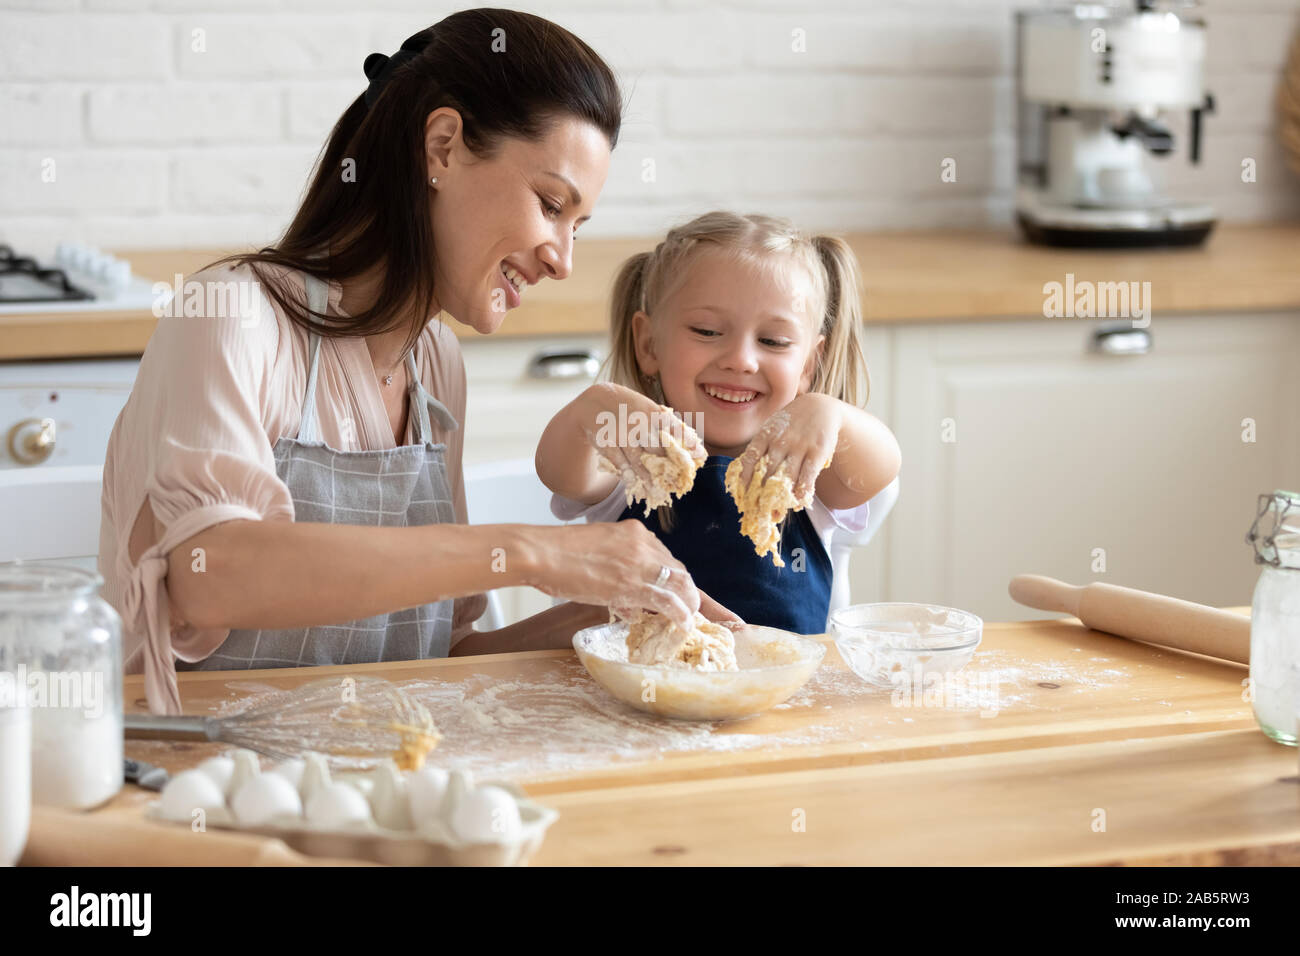 Funny child helper playing with dough helping mom in kitchen Stock Photo